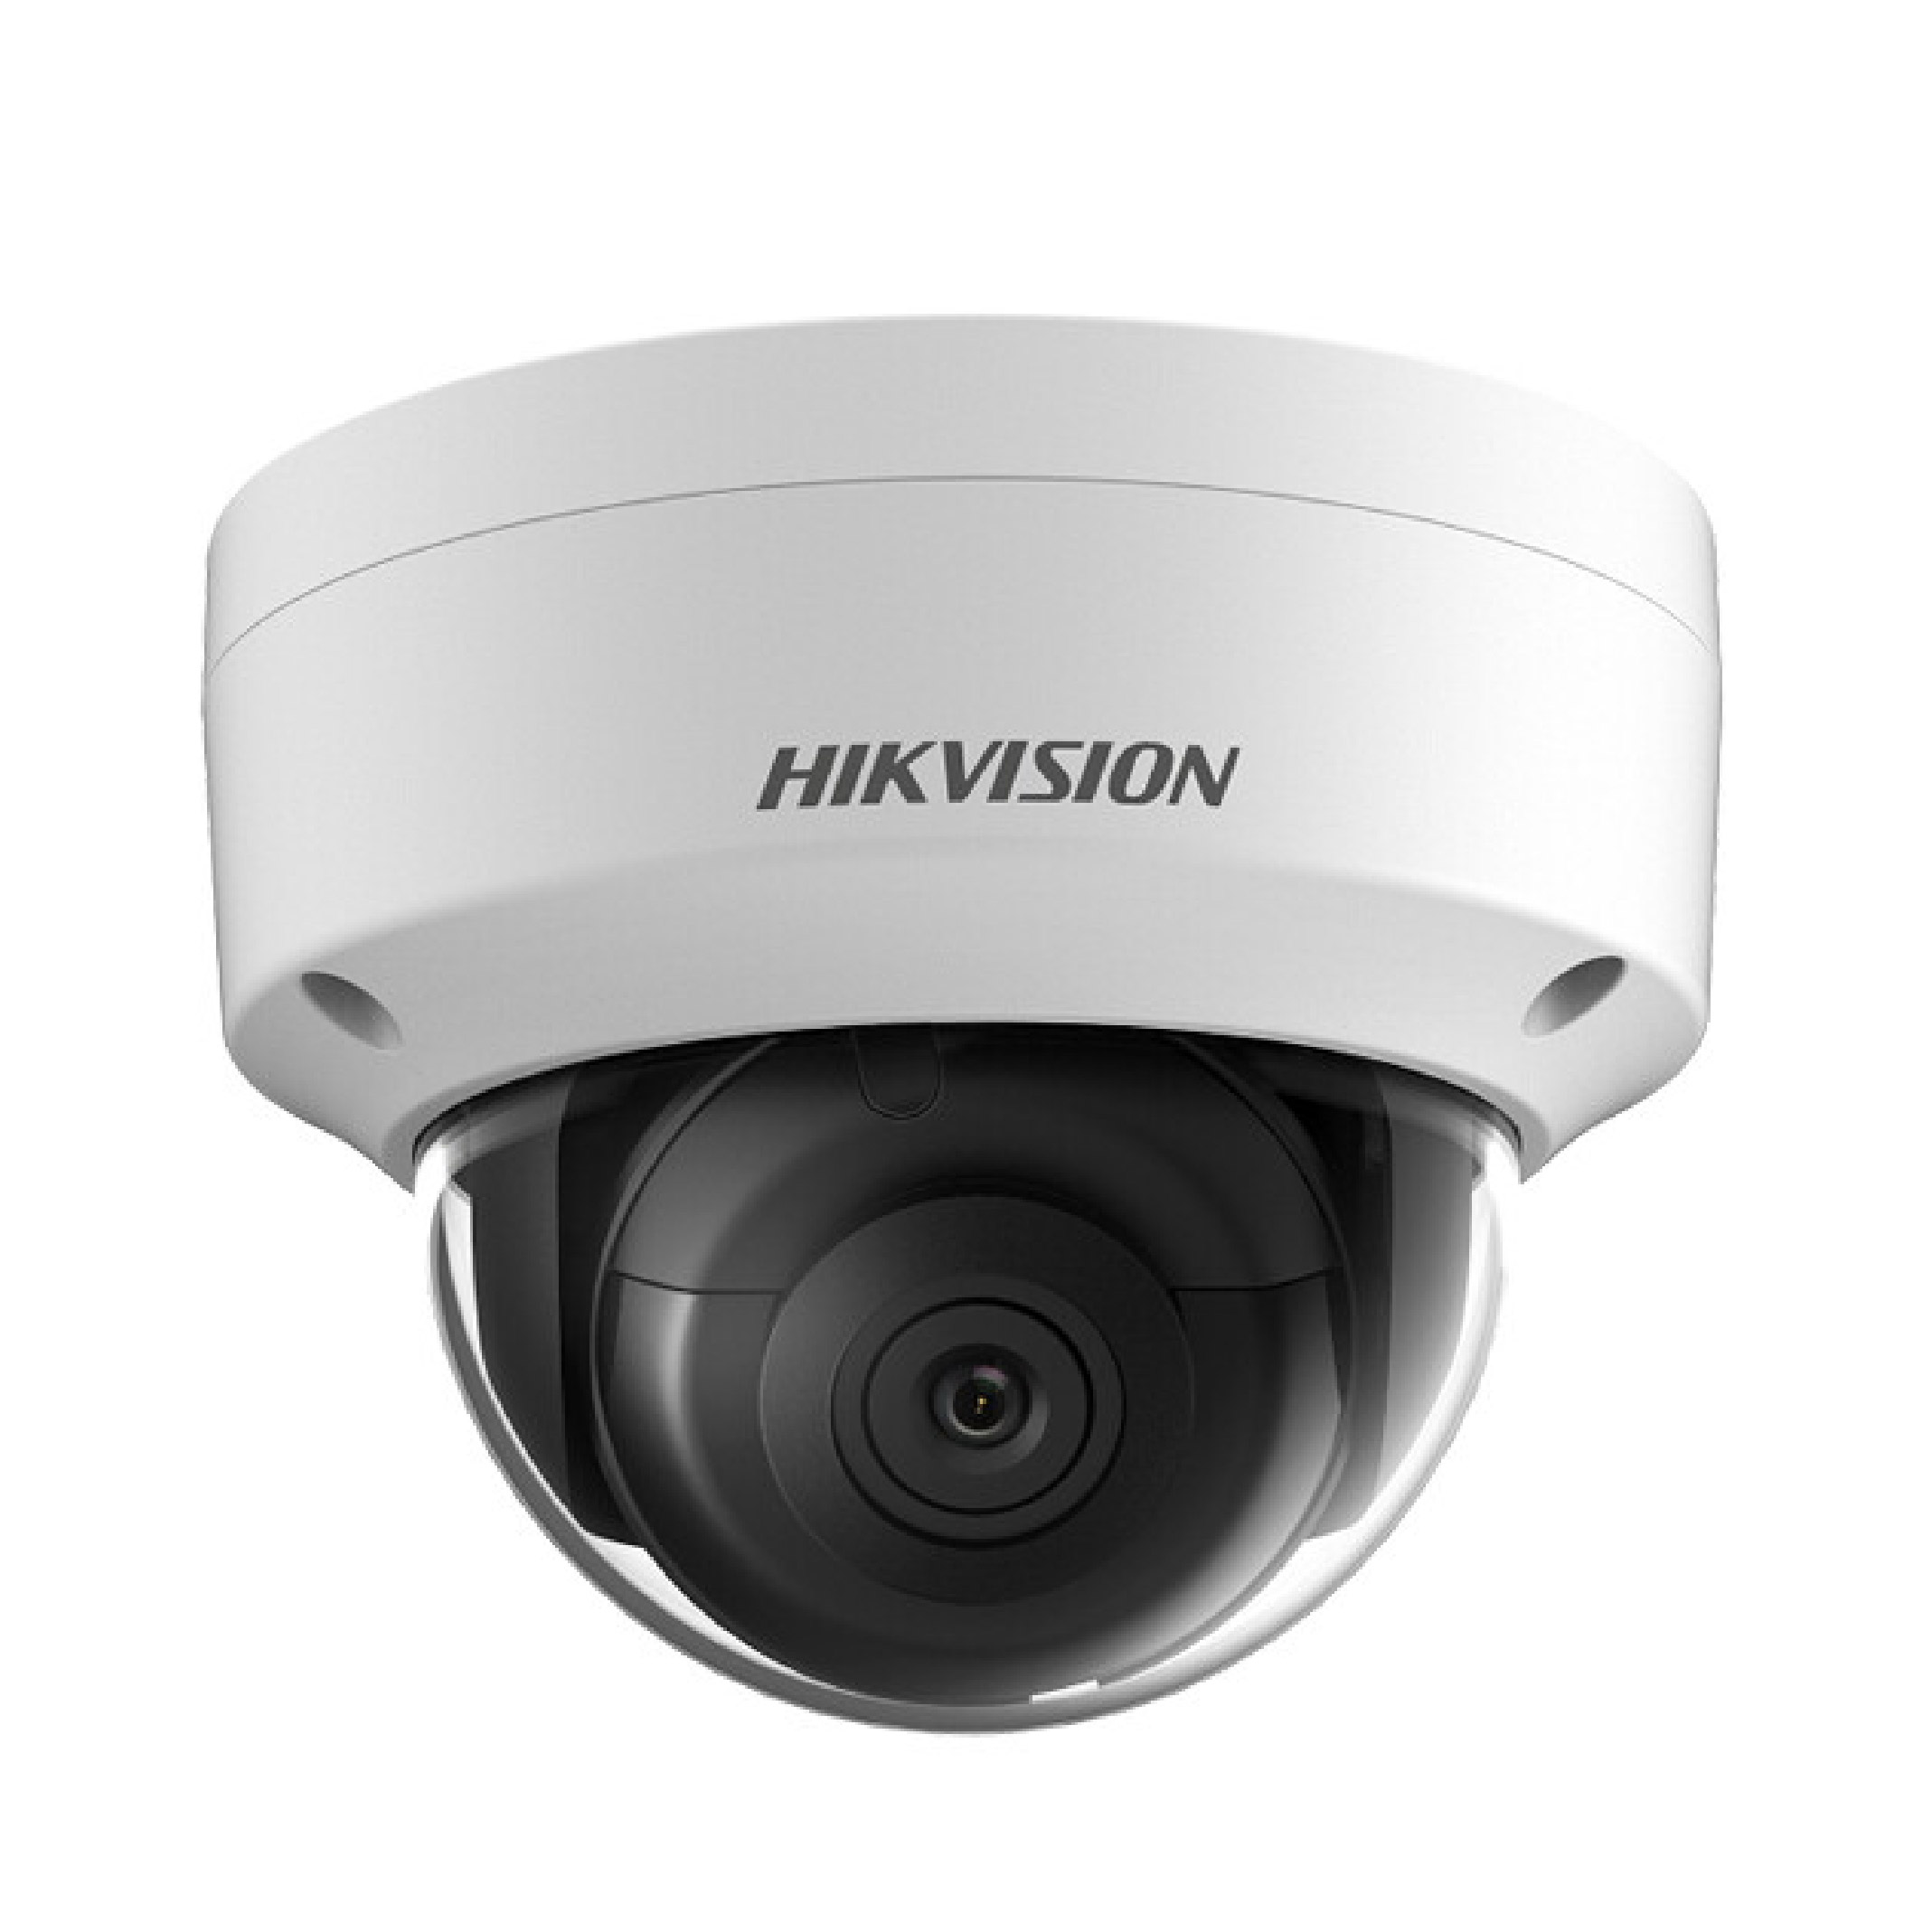 HIKVISION DS-2CD2185FWD-I(S) Turbo HD Camera